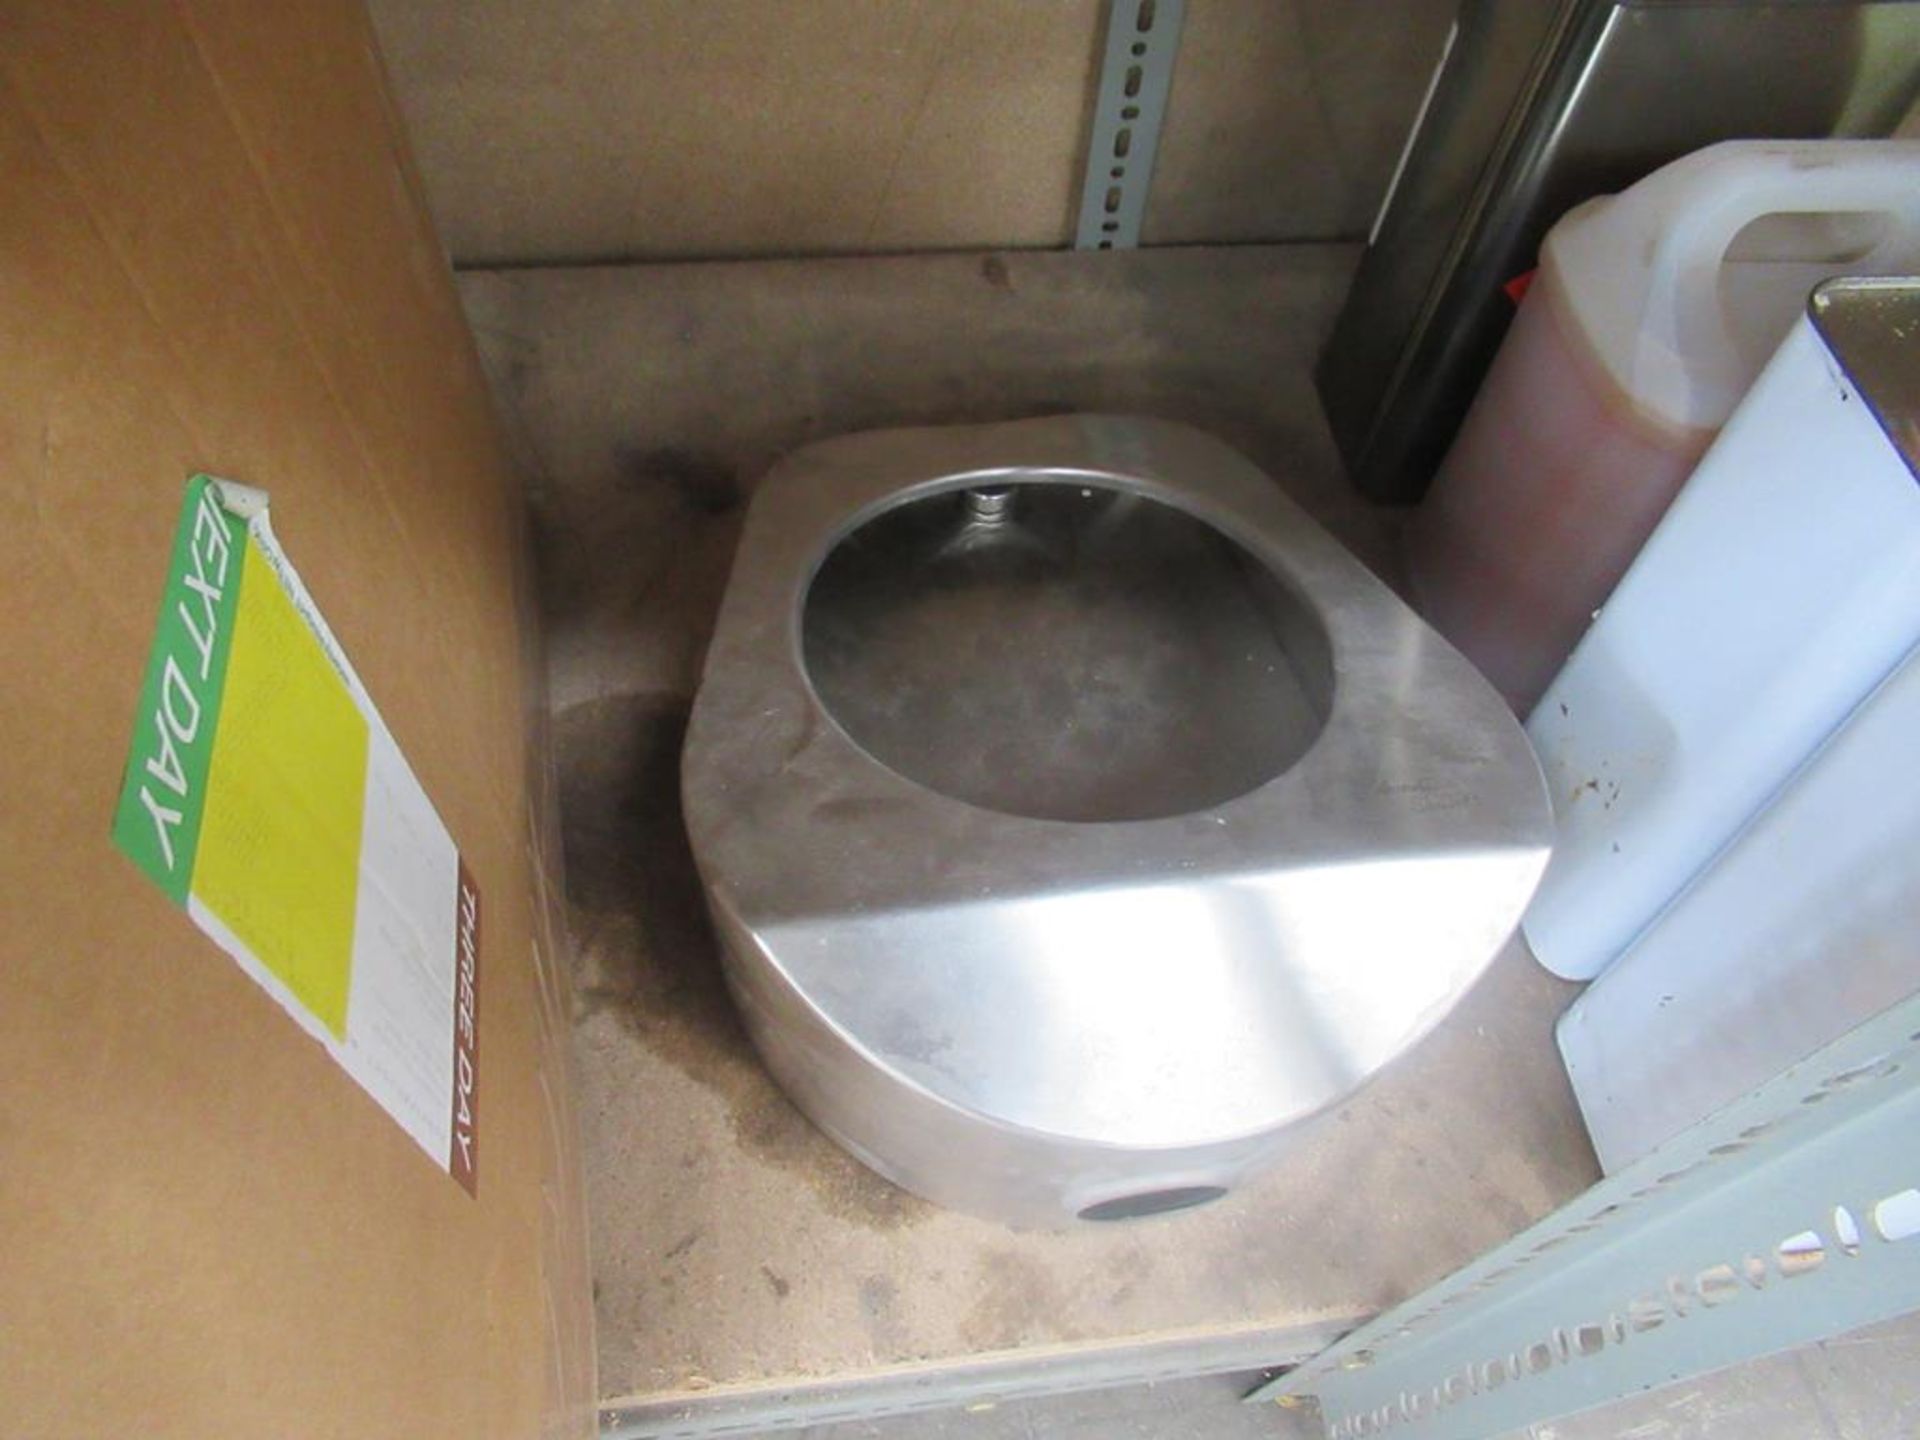 Stainless steel toilet and urinal - Image 2 of 2